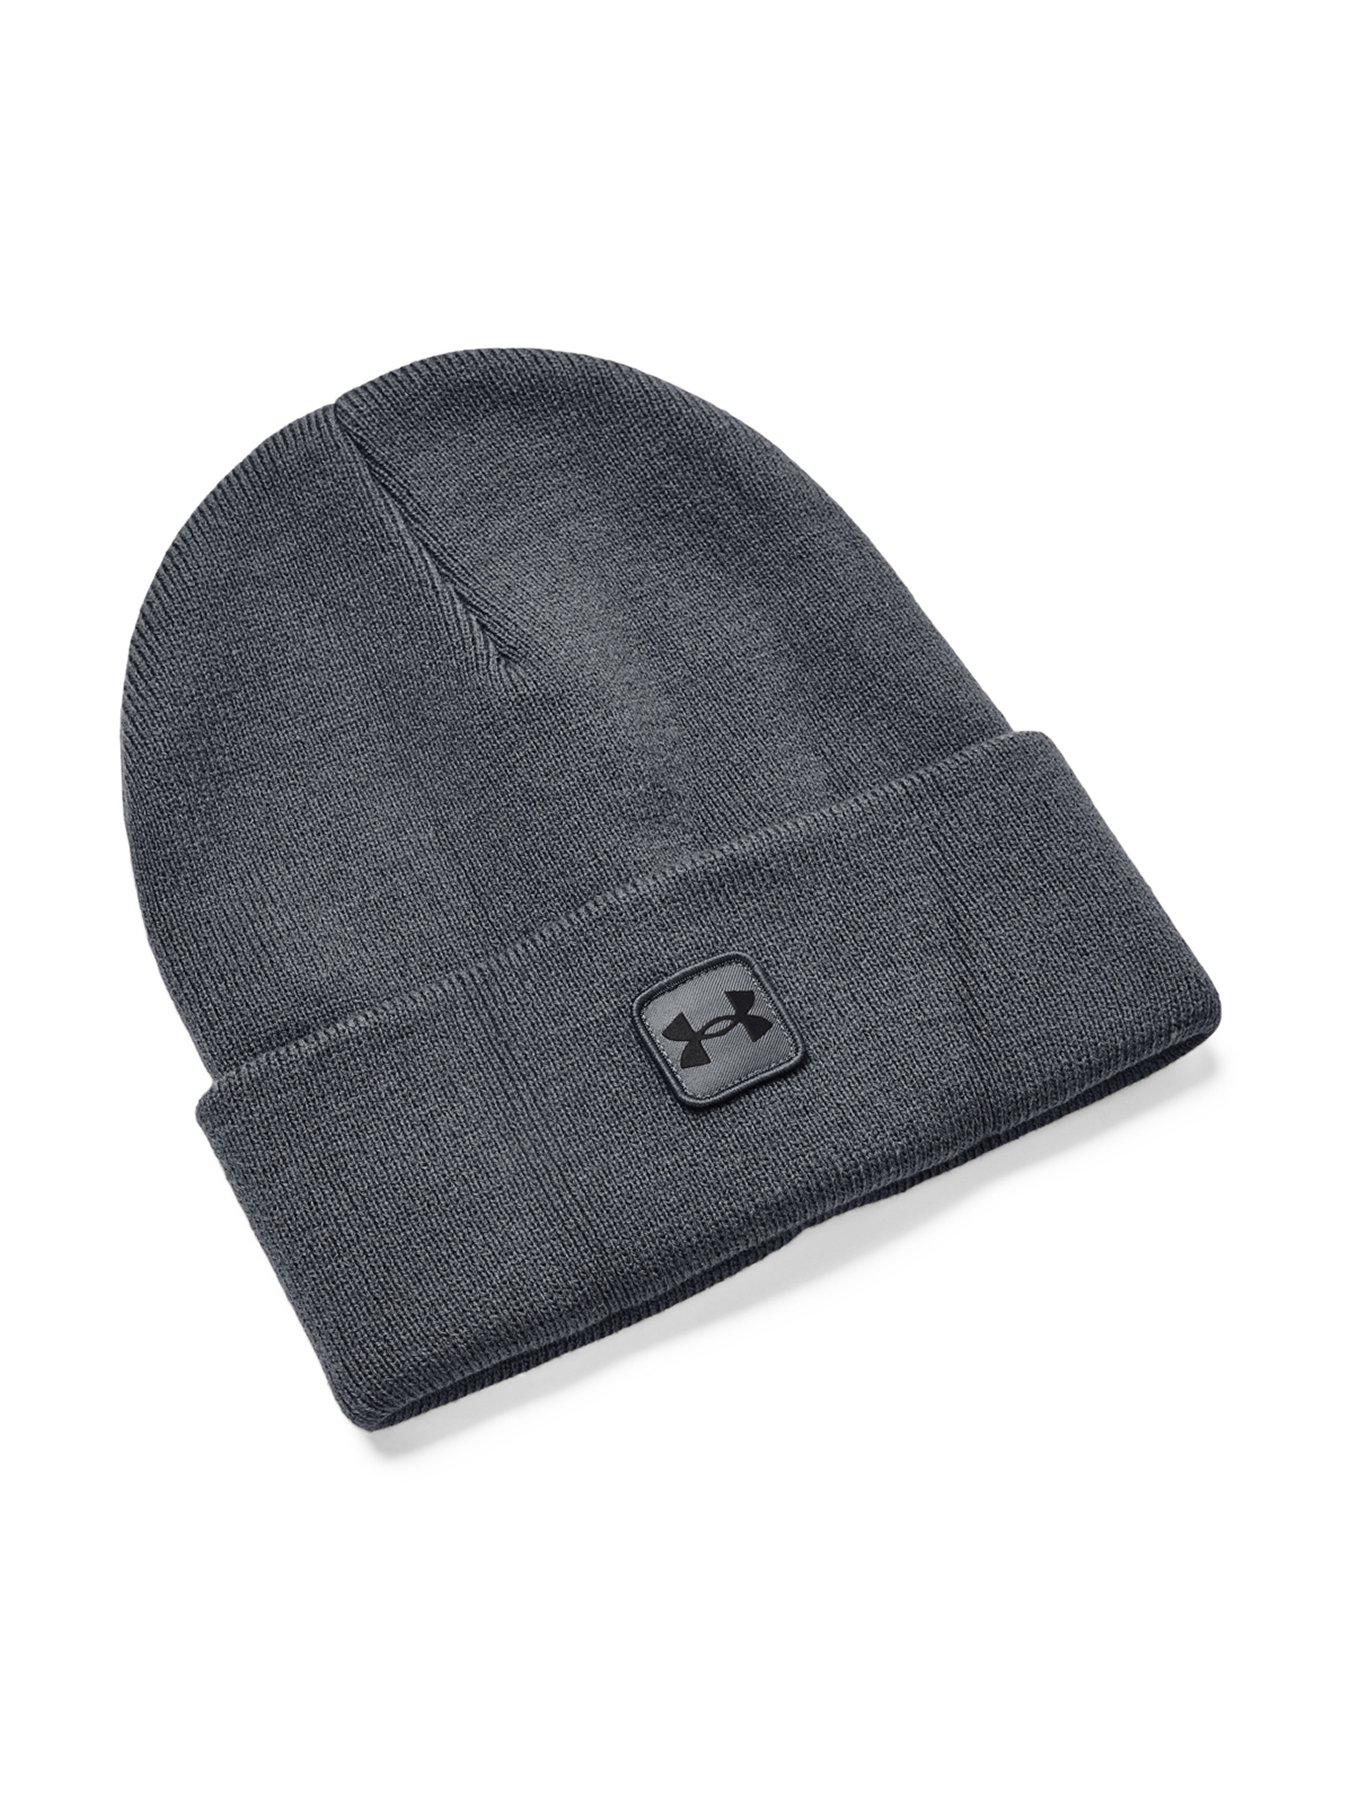 discount 71% MEN FASHION Accessories Navy Blue Single Pull&Bear hat and cap 